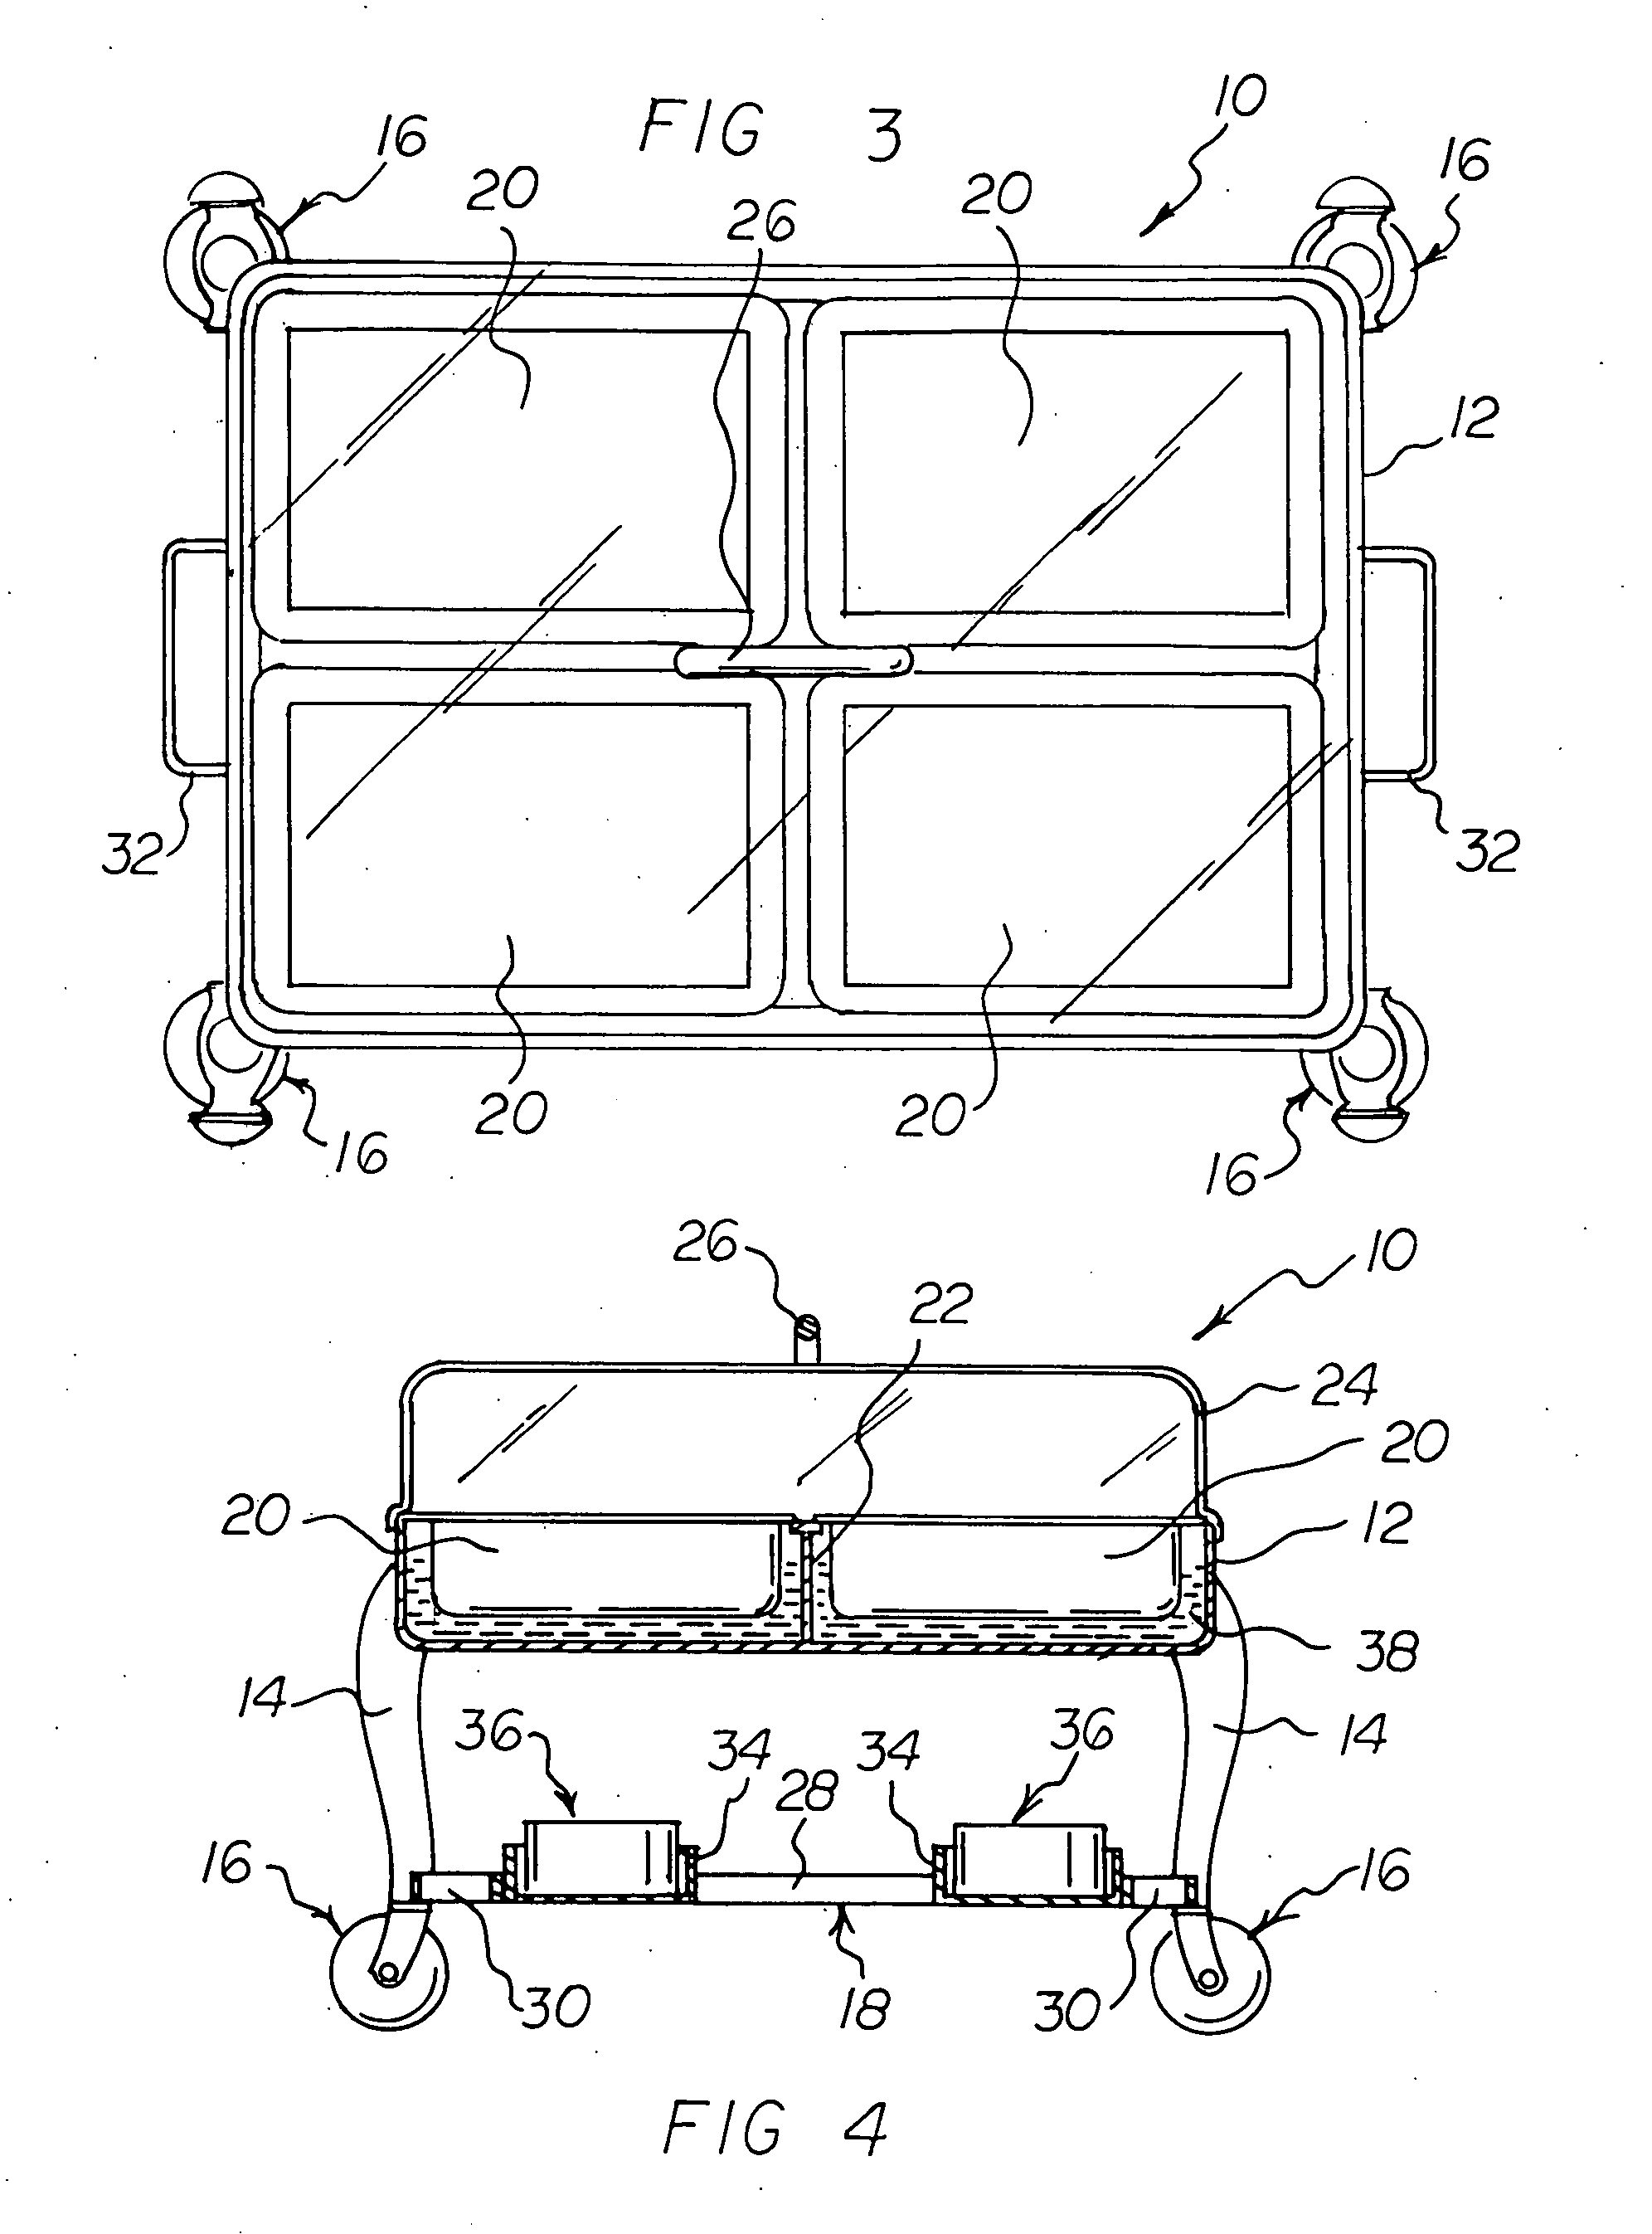 Mobile chafing dish apparatus